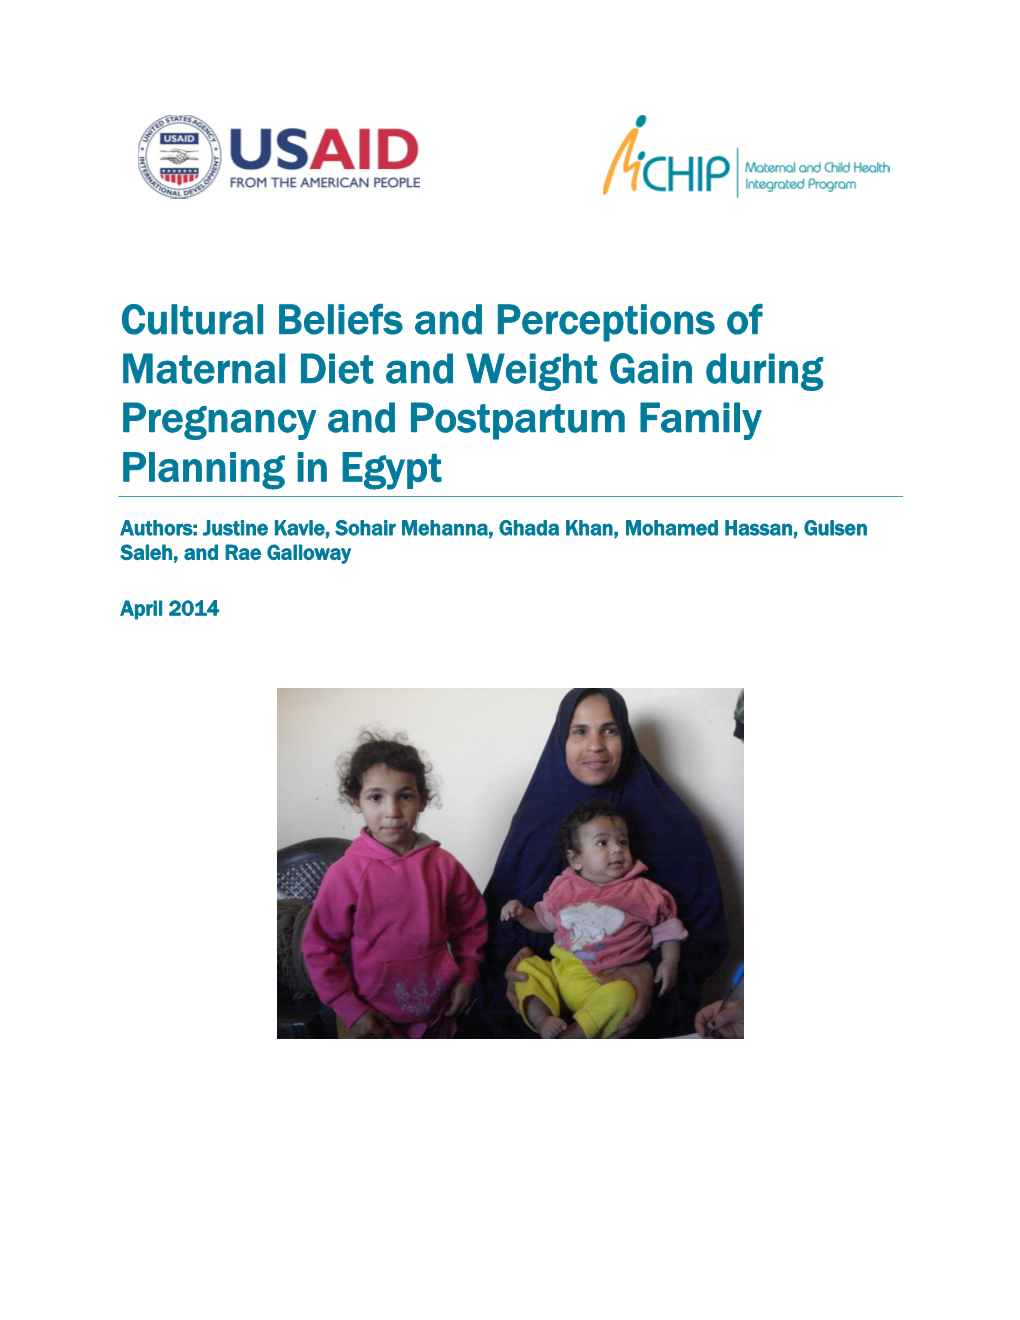 Cultural Beliefs and Perceptions of Maternal Diet and Weight Gain During Pregnancy and Postpartum Family Planning in Egypt